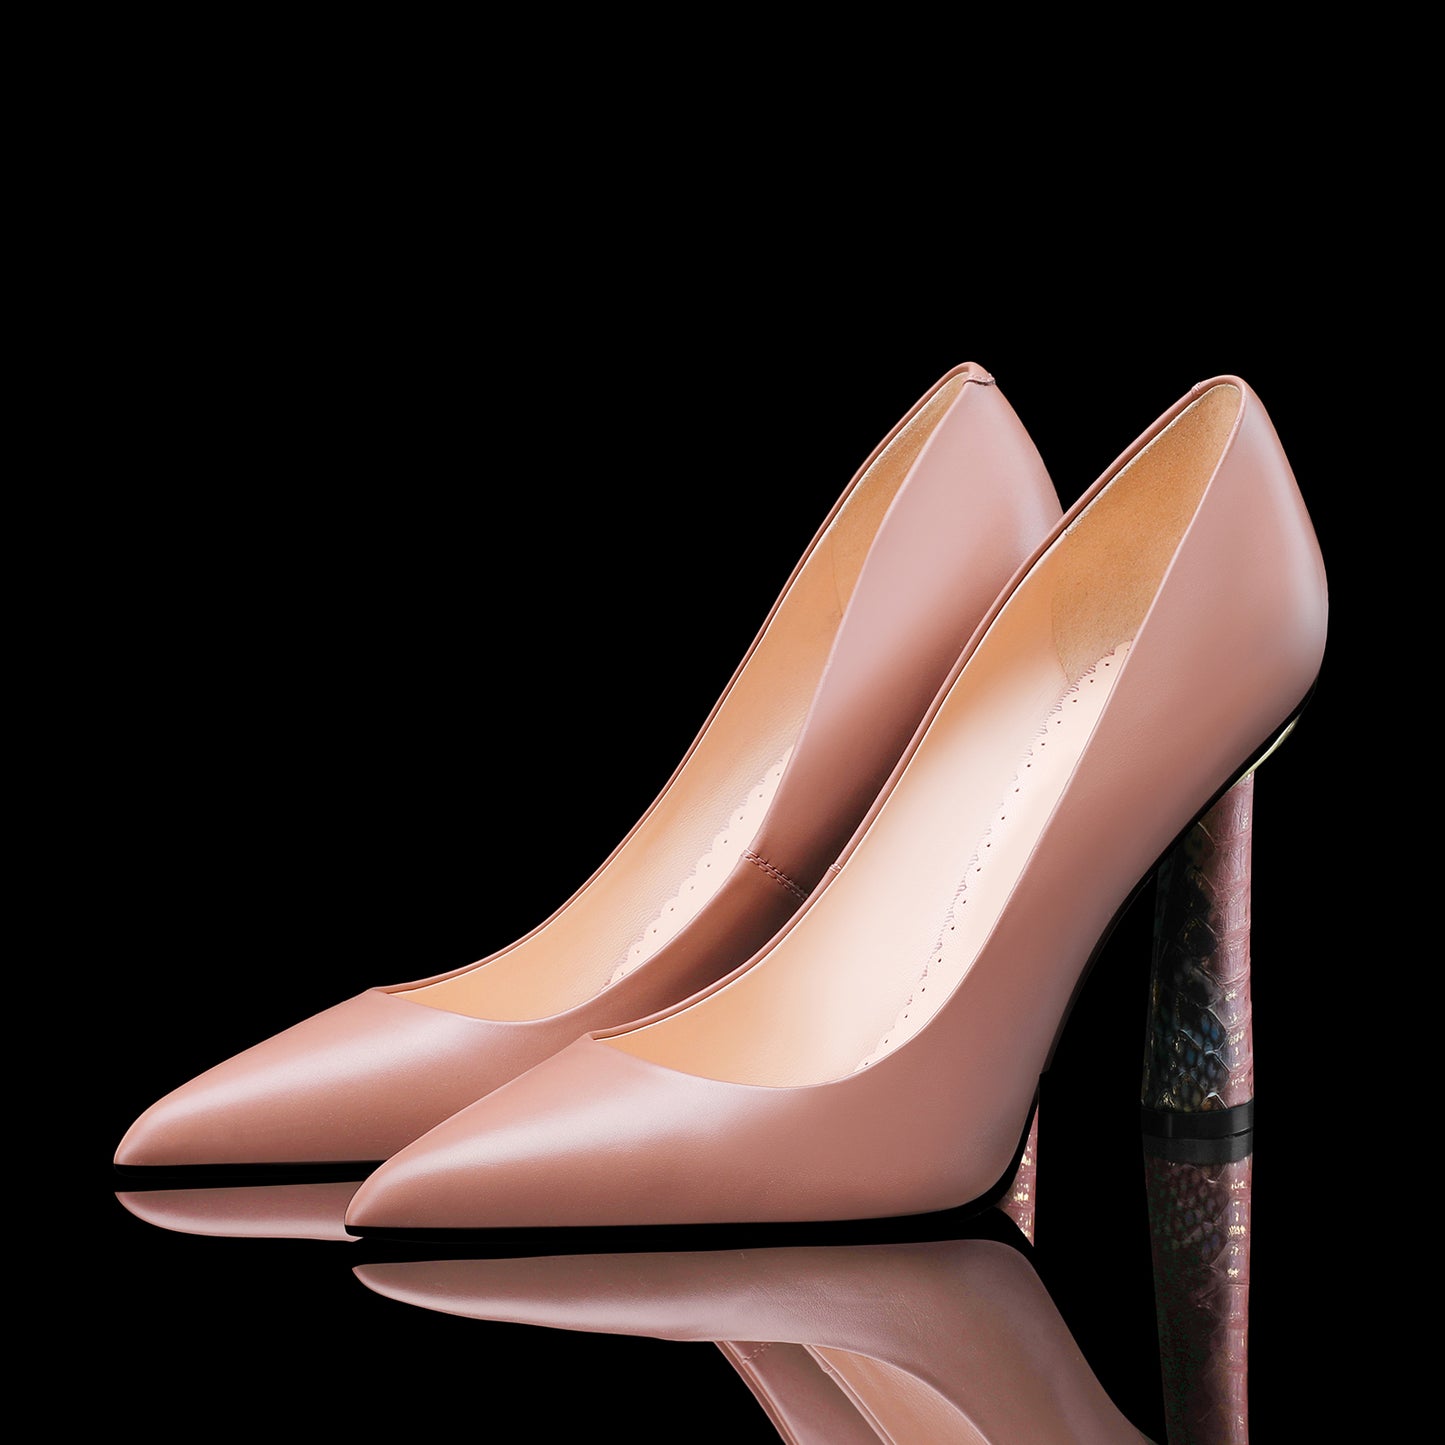 Leather Heels for Women: Pointed Toe Pumps Block High Heel